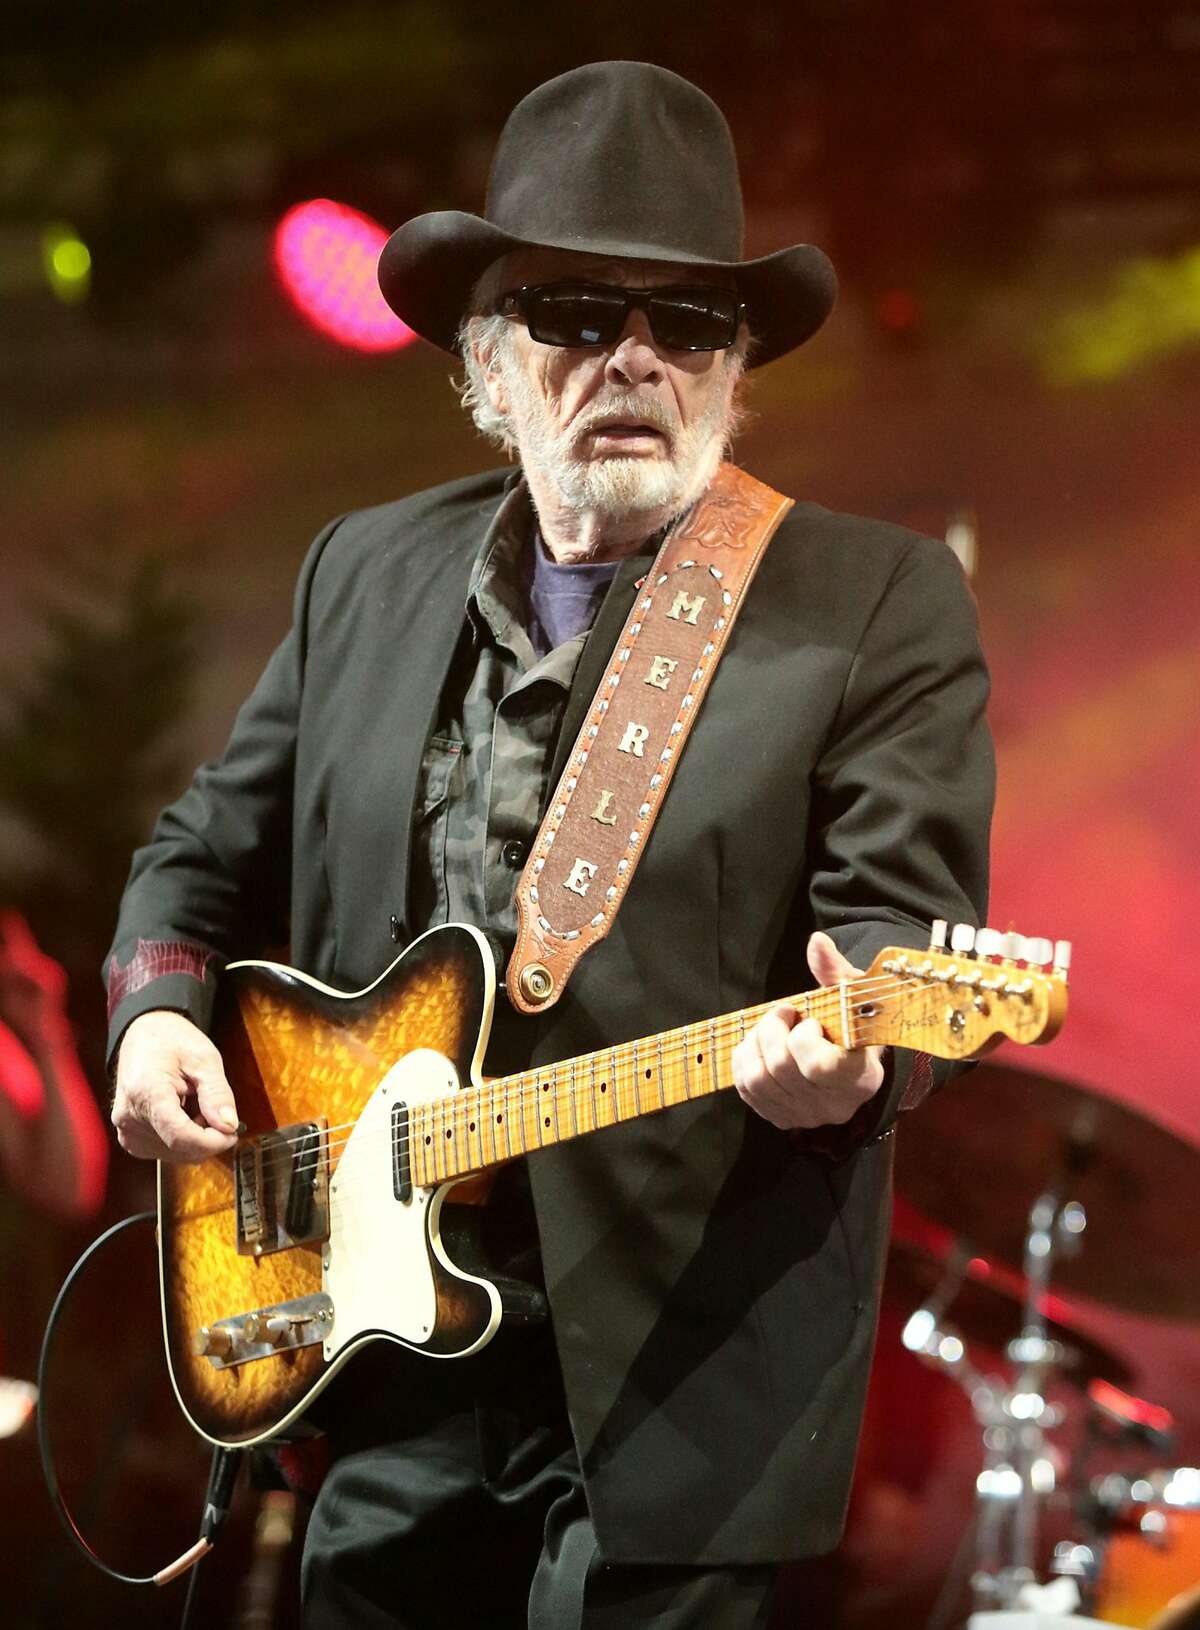 FILE - In this June 28, 2015 file photo, Merle Haggard performs on Day 3 of the 2015 Big Barrel Country Music Festival at The Woodlands on Sunday, June 28, 2015, in Dover, Del. Haggard died of pneumonia, Wednesday, April 6, 2016, in Palo Cedro, Calif. He was 79. (Photo by Owen Sweeney/Invision/AP)